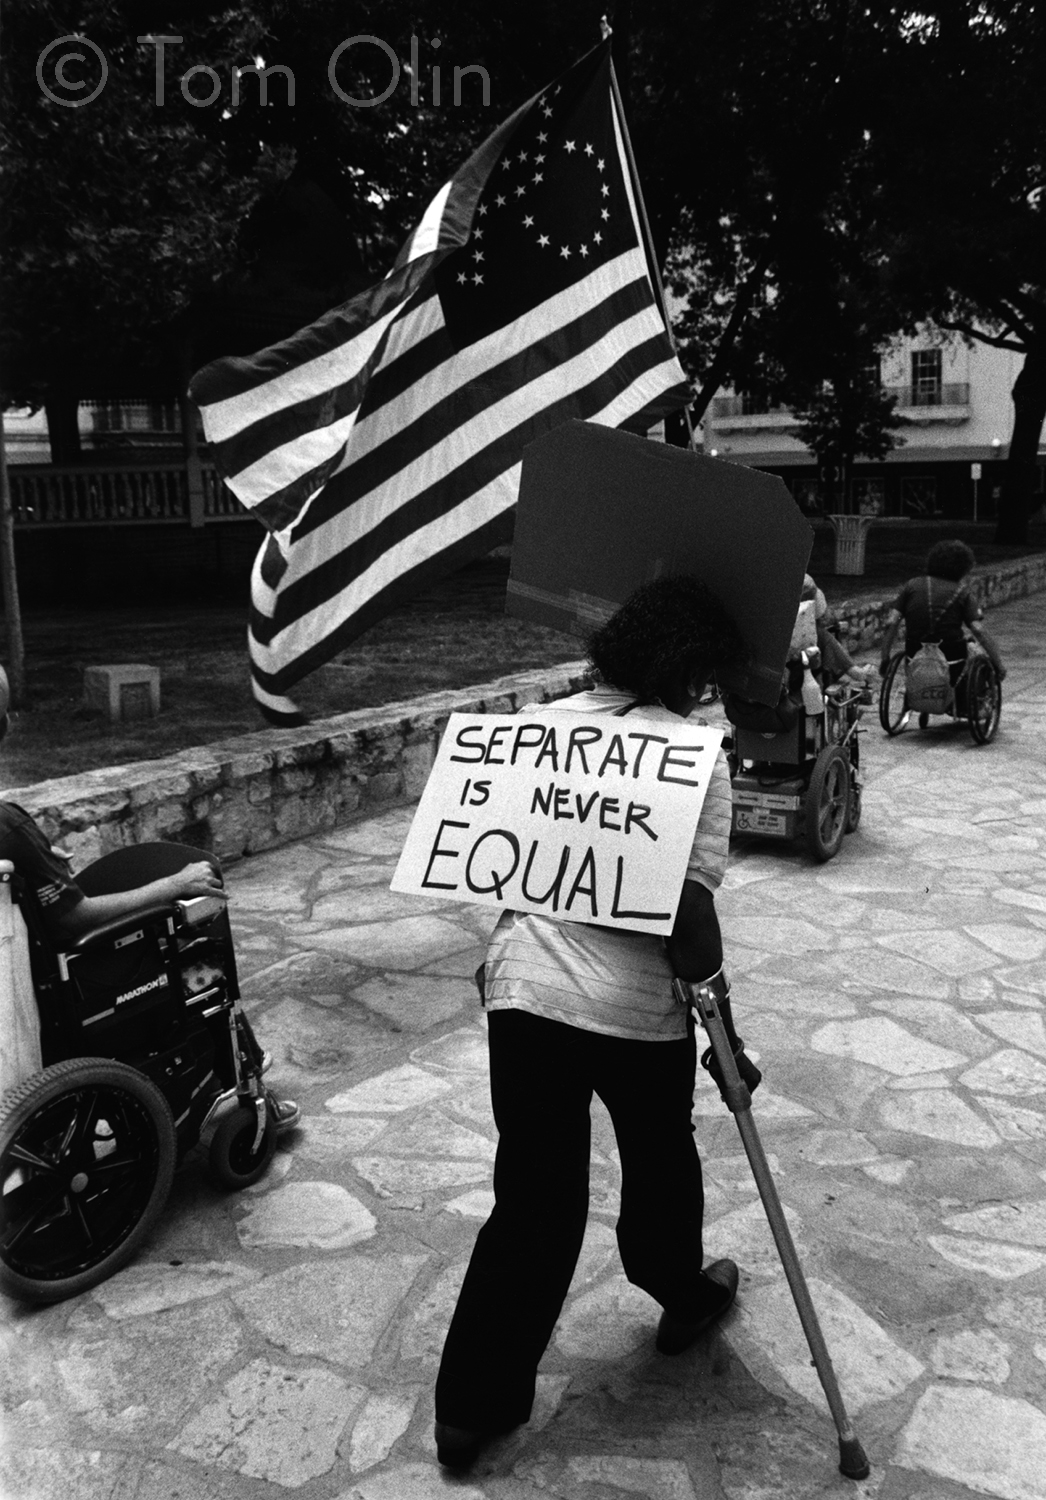 Black and white photograph of several disability rights activists marching on a cobblestone sidewalk. In the foreground, an activist his using a cane and holding a large American flag. Where the fifty stars usually are, there's an outline of the accessibility symbol made of stars. The activist is holding a sign that says separate is never equal. In the background are several people in wheelchairs.